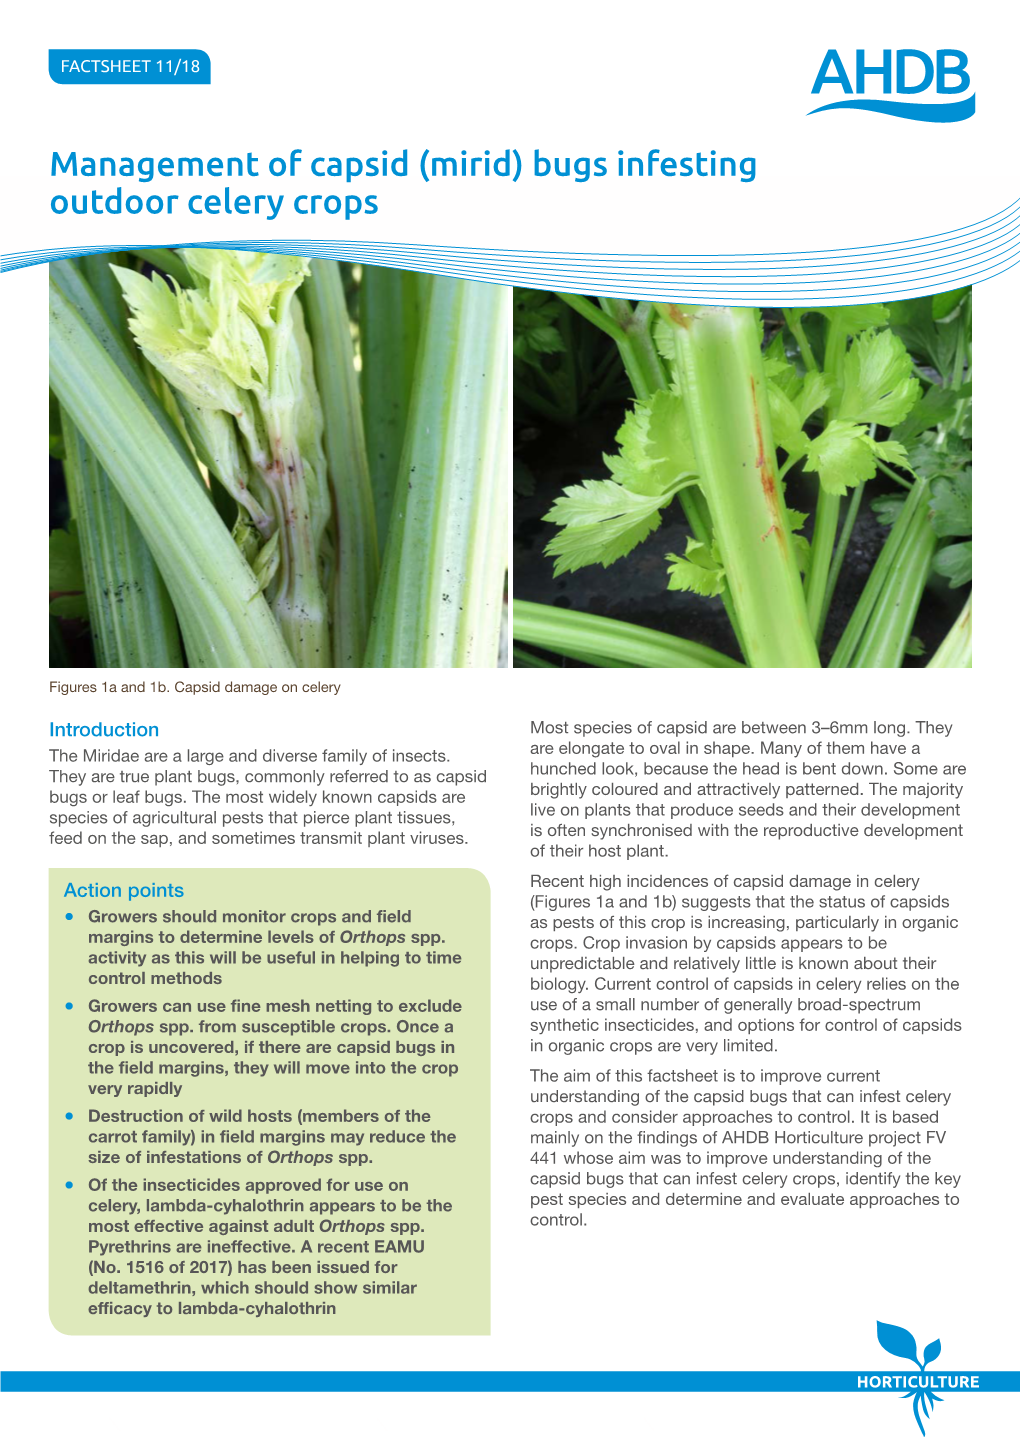 Management of Capsid (Mirid) Bugs Infesting Outdoor Celery Crops